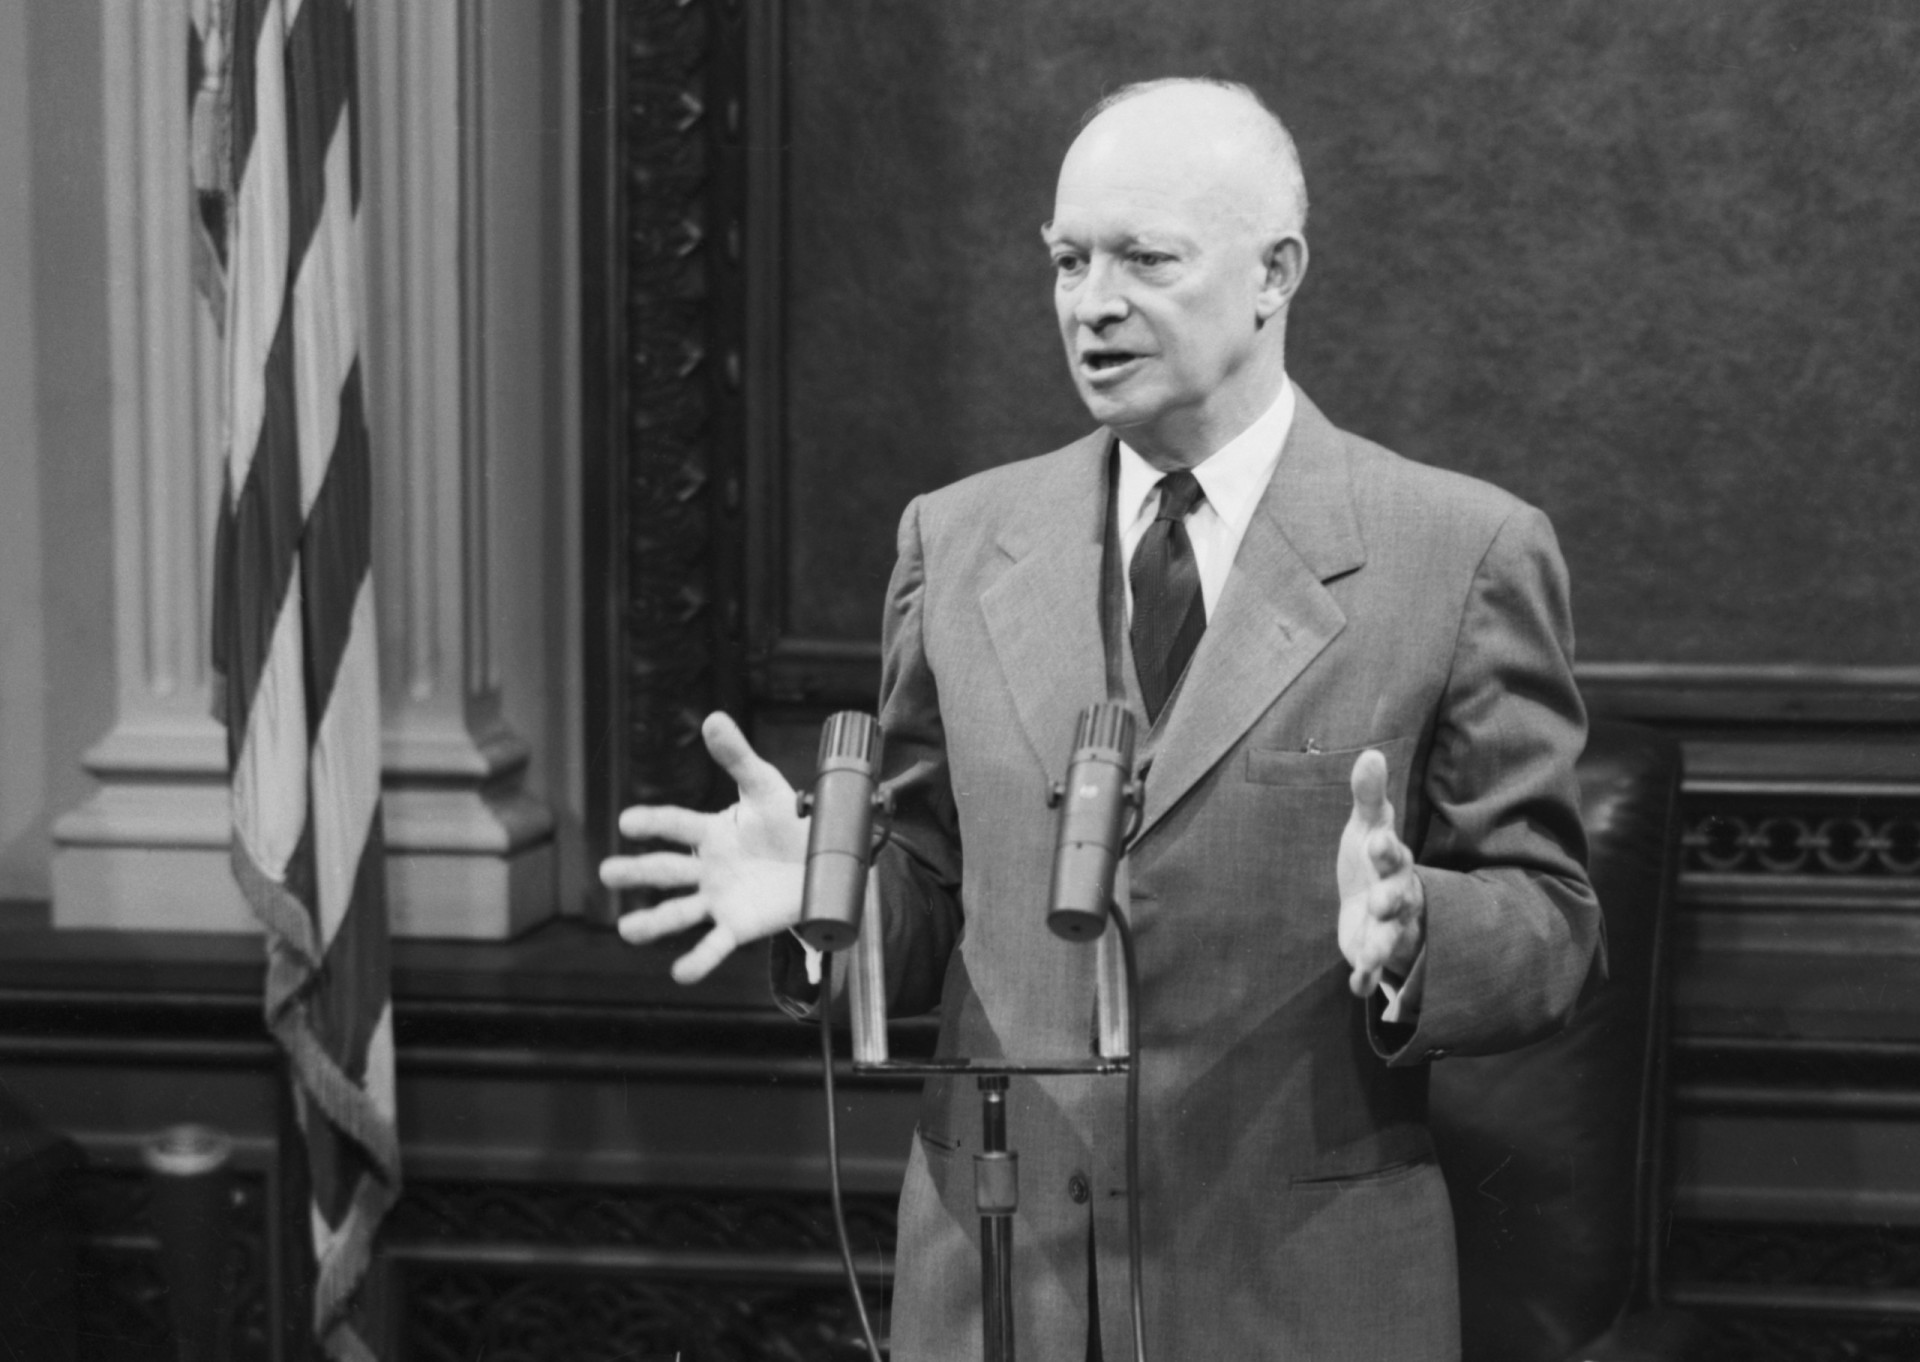 <p>On June 29, 1956, President Dwight D. Eisenhower signed into law the Federal-Aid Highway Act. The bill authorized the construction of 41,000 miles (66,000 km) of the Interstate Highway System over a 10-year period, at a cost of US$25 billion (equivalent to approximately $215 billion in 2024). </p><p><a href="https://www.msn.com/en-us/community/channel/vid-7xx8mnucu55yw63we9va2gwr7uihbxwc68fxqp25x6tg4ftibpra?cvid=94631541bc0f4f89bfd59158d696ad7e">Follow us and access great exclusive content every day</a></p>